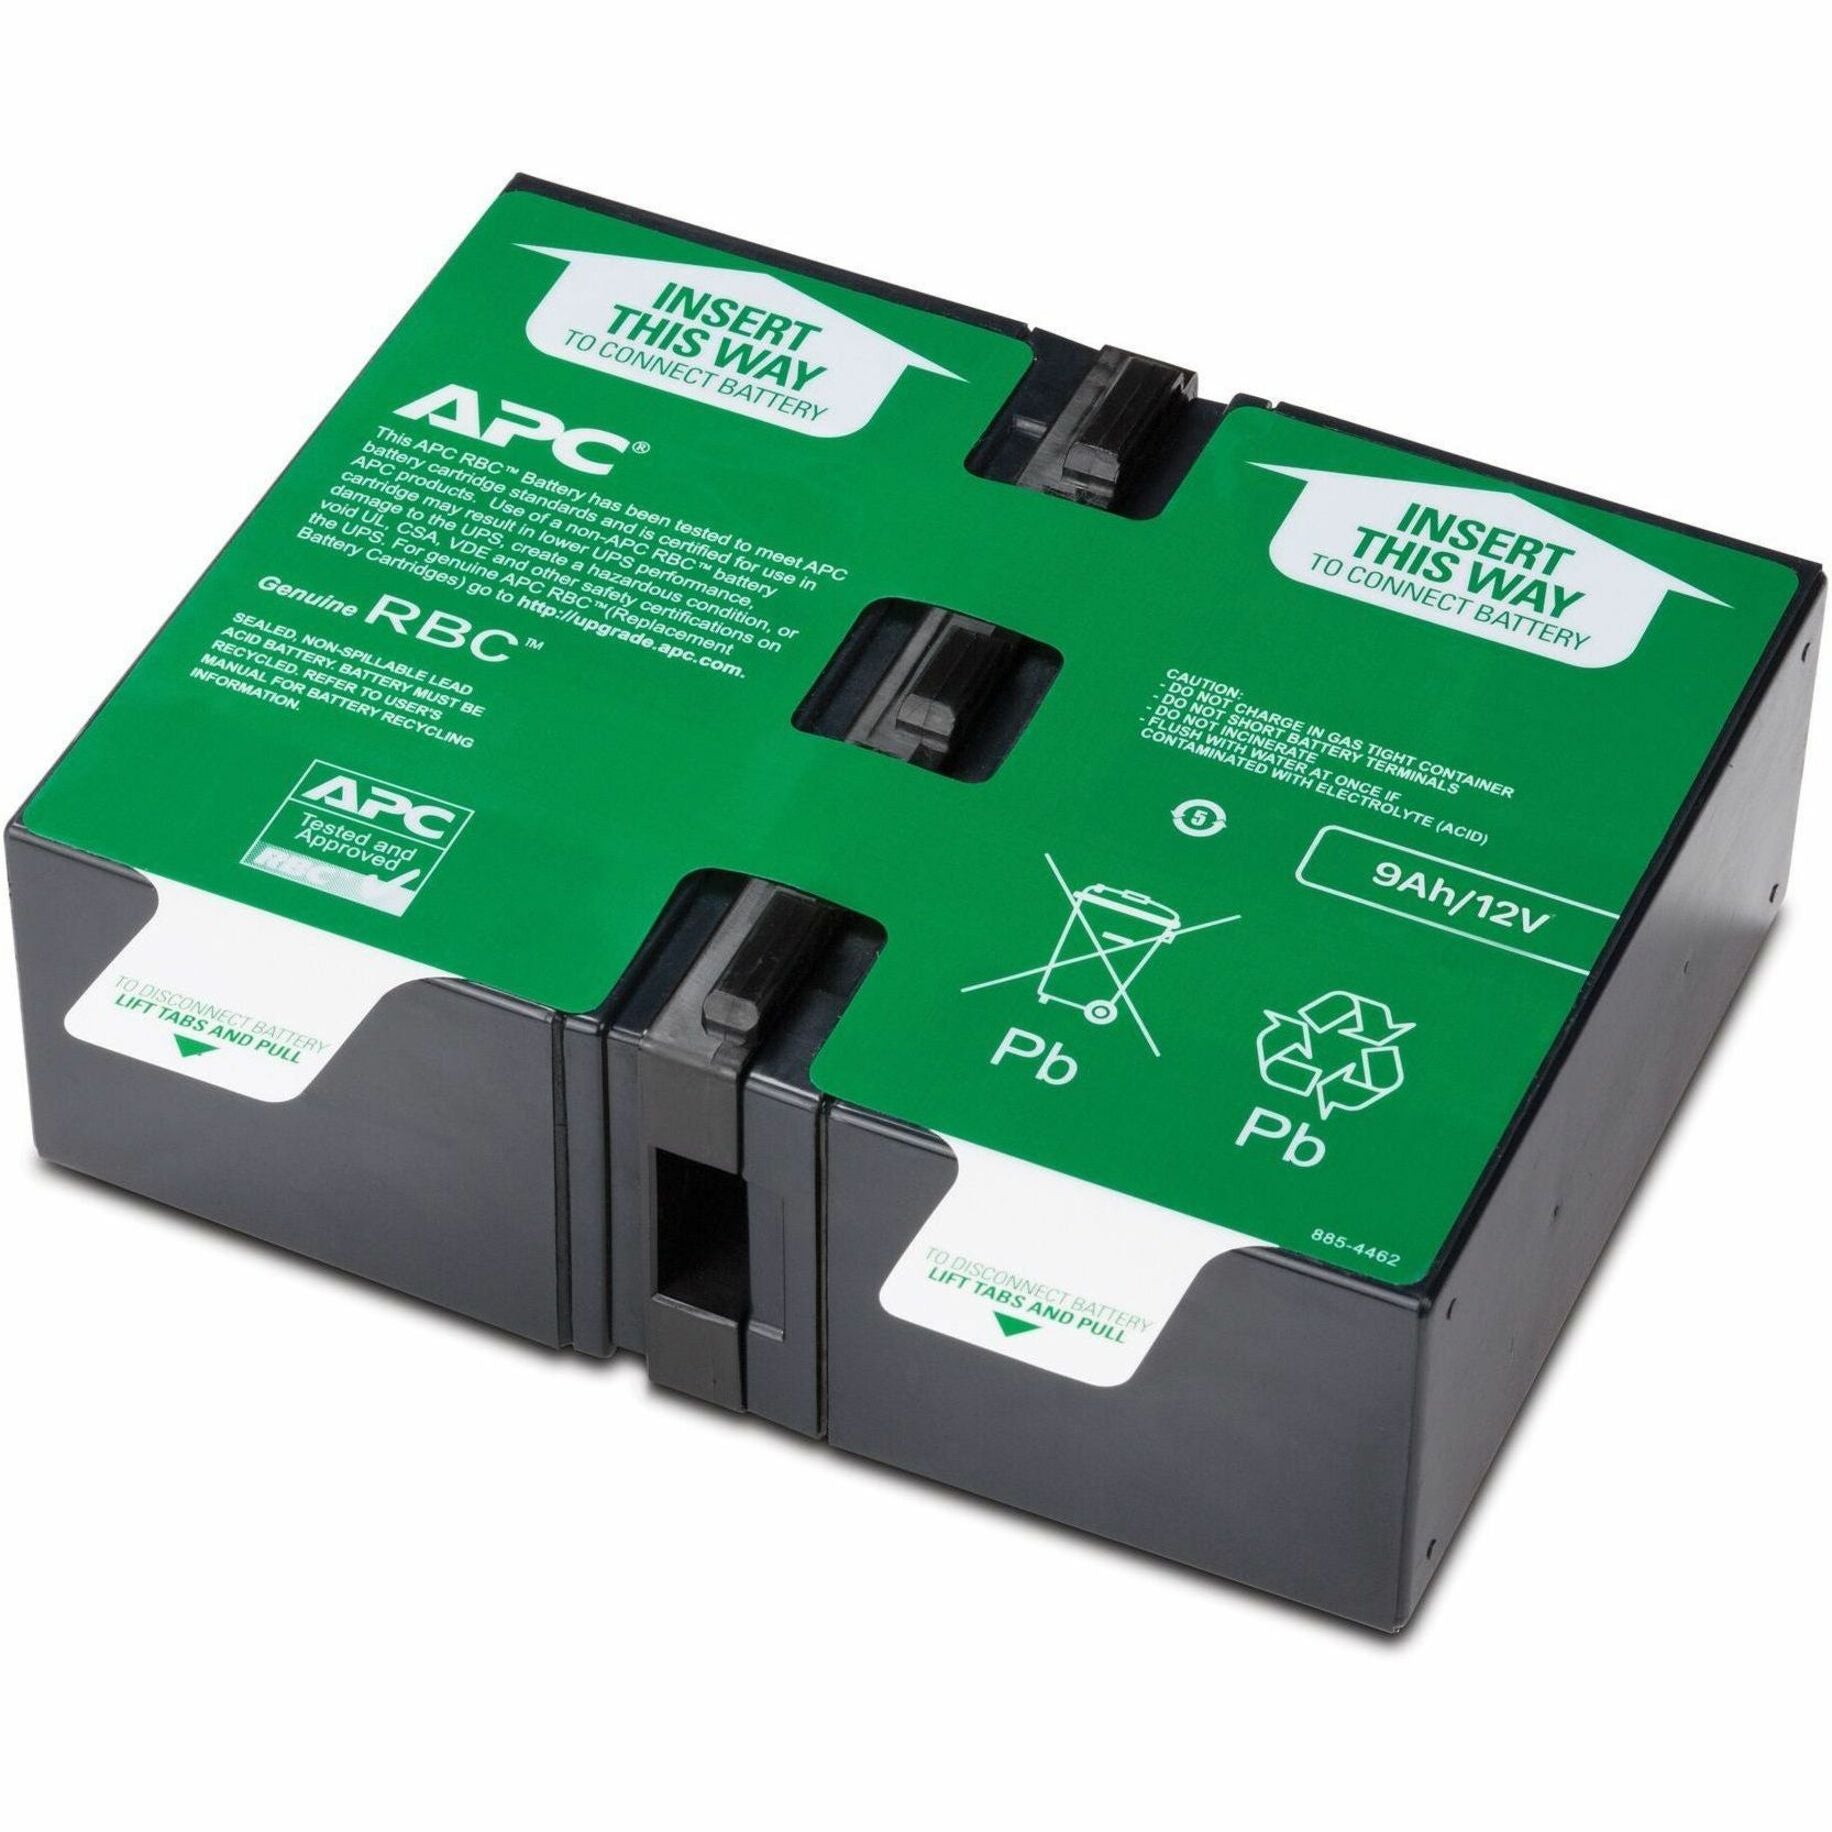 APC APCRBC124 UPS Replacement Battery Cartridge # 124, 2 Year Warranty, Hot Swappable, Lead Acid, Spill-proof/Maintenance-free